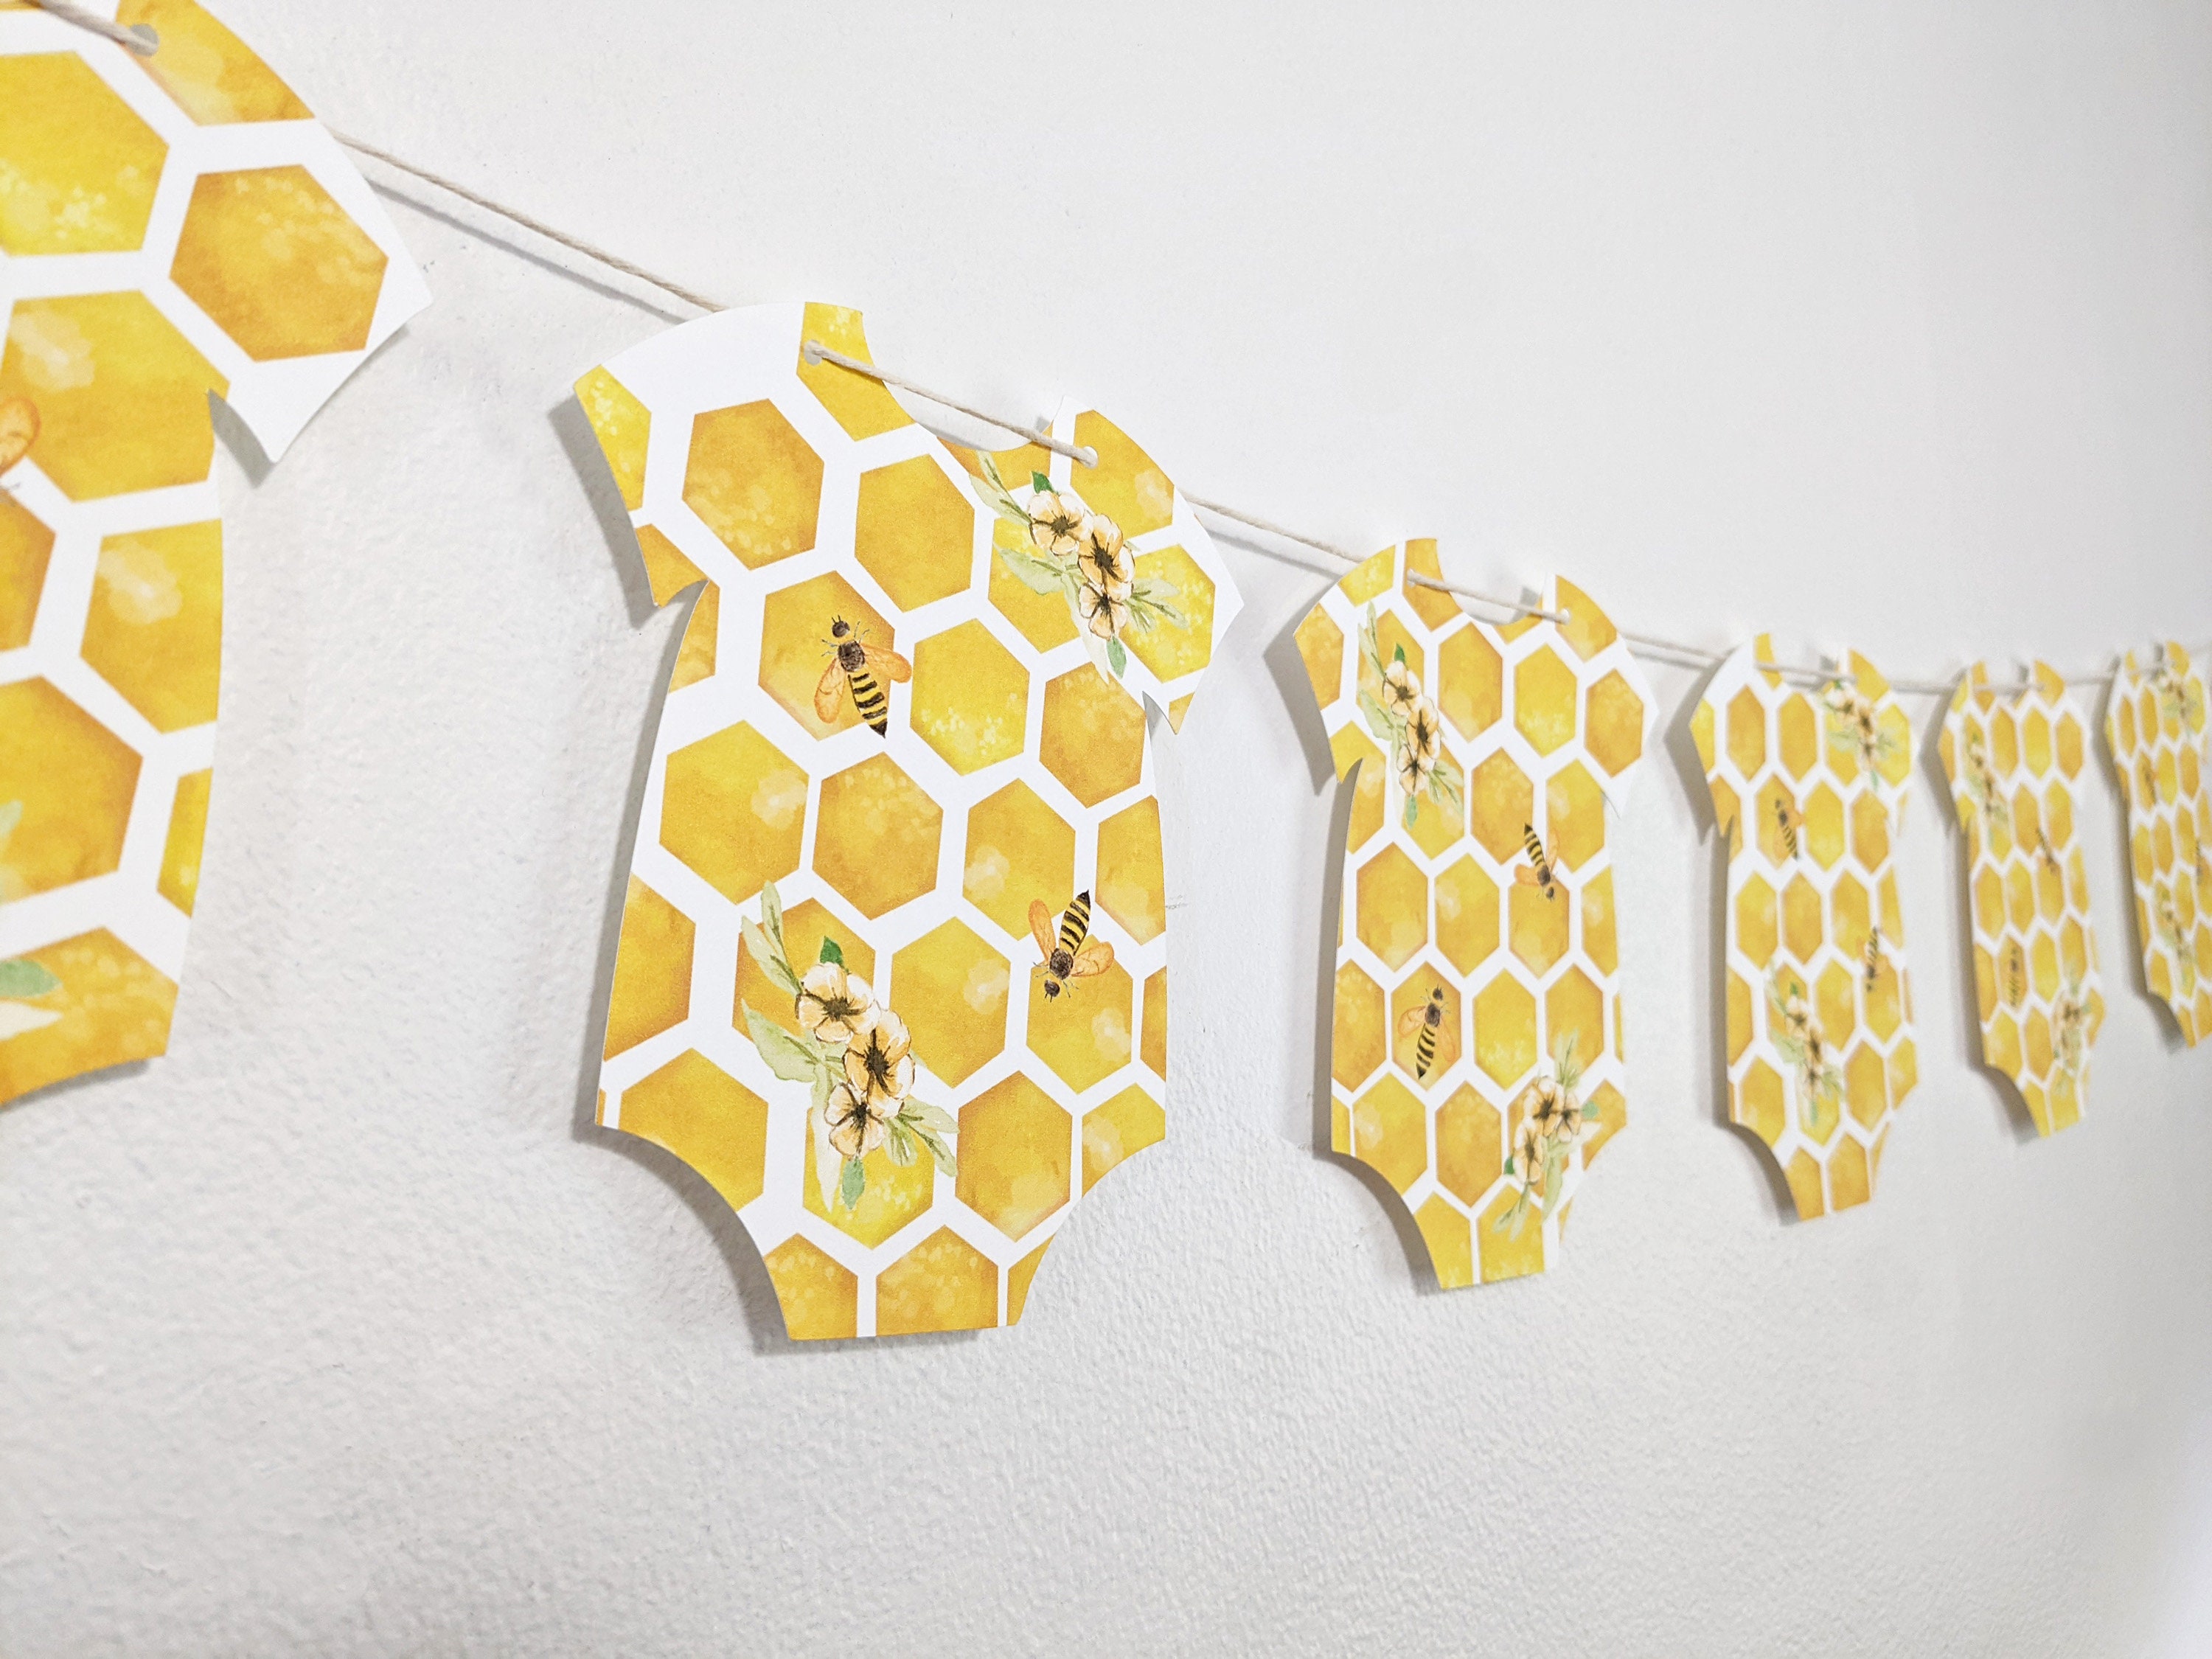 Sifan Honey Bee Party Decorations, Bumble Bee Baby Shower Hanging Paper Fans Lanterns Tissue Honeycomb Ball Glitter Circle Dot Garland